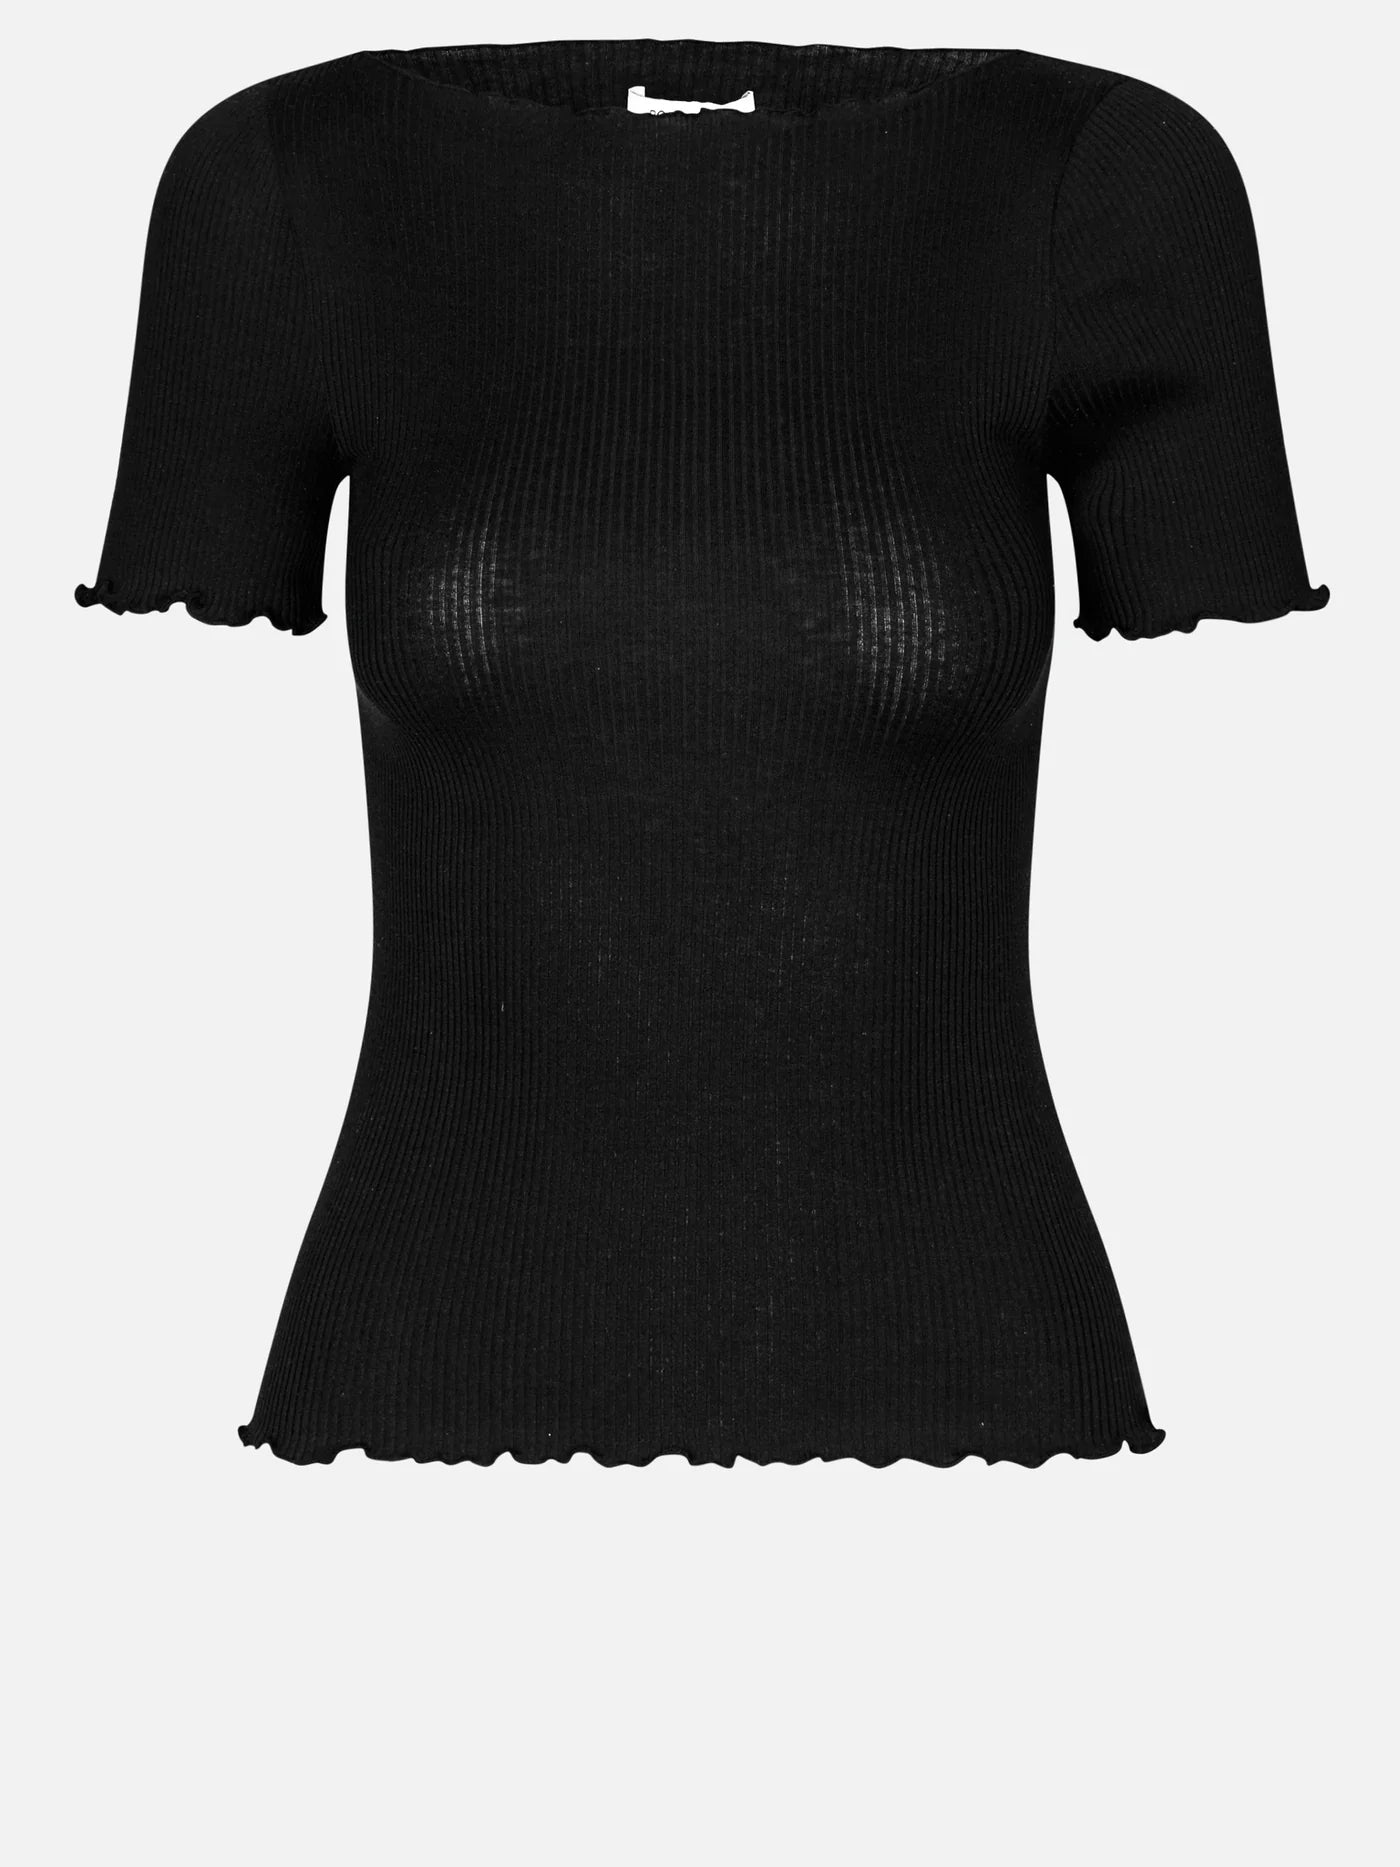 Black silk blend ribbed knit Boat Neck T-Shirt with short sleeves and scalloped edges by Rosemunde.